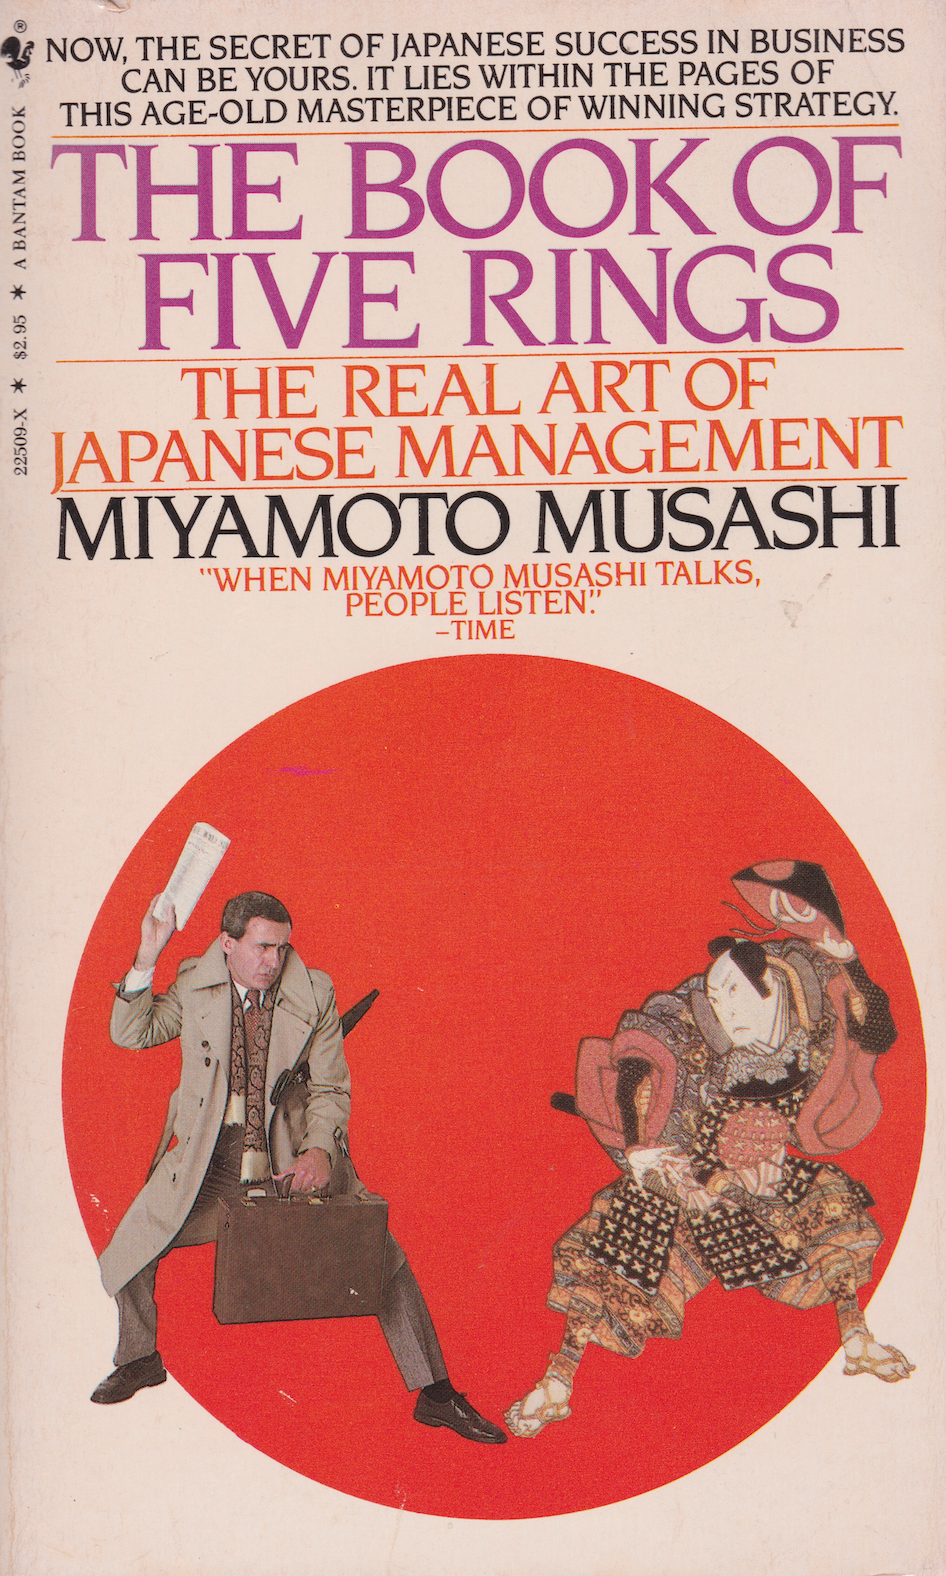 The Book of Five Rings: Real Art of Japanese Management by Miyamoto Musashi (Preowned) - Budovideos Inc